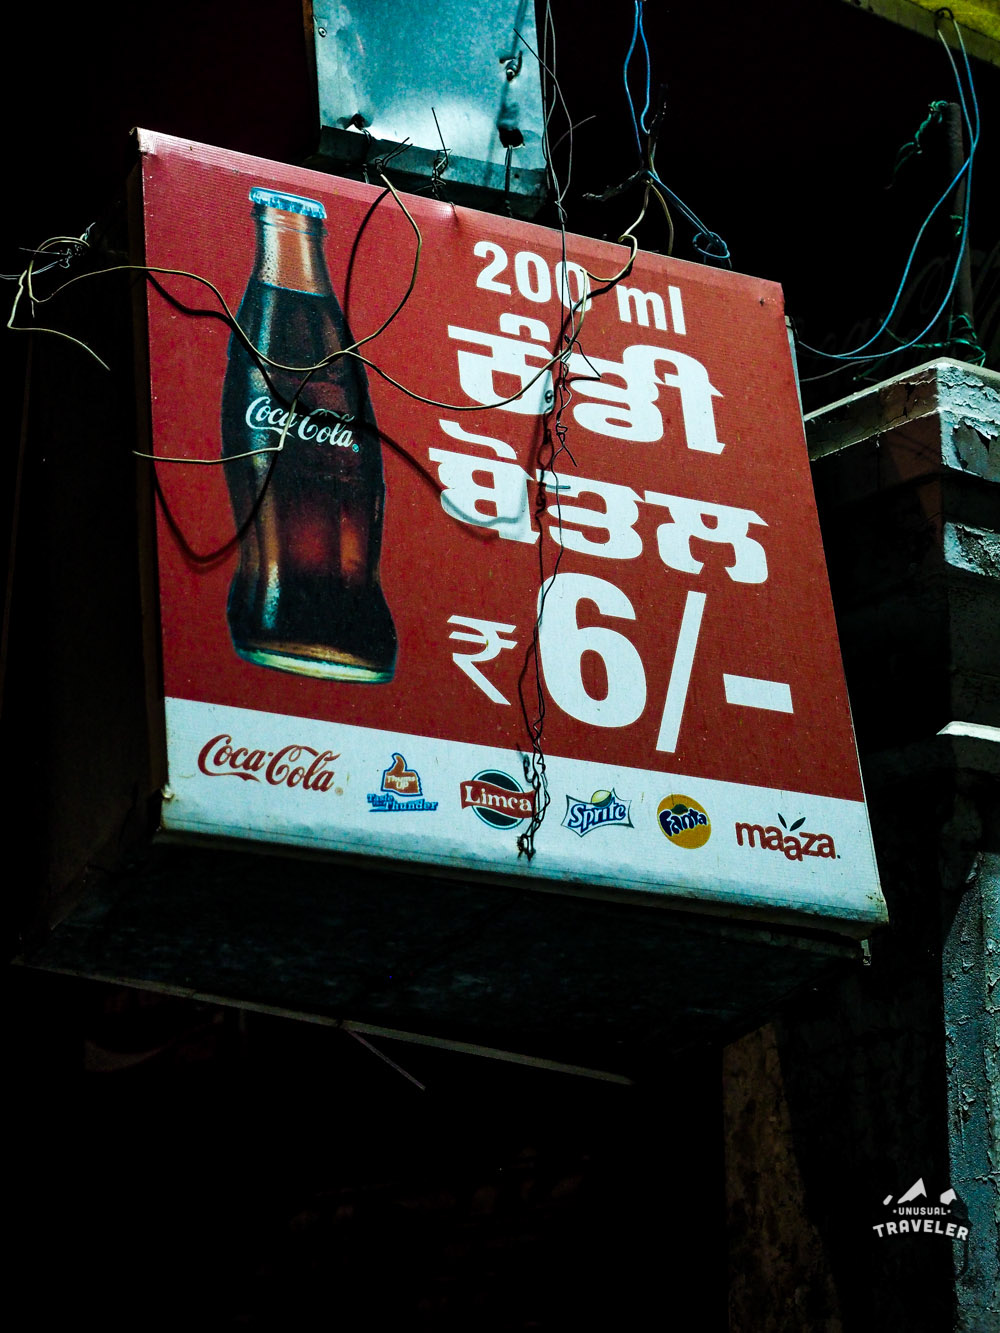 the cheapest coca cola in the world, Golden Temple in India